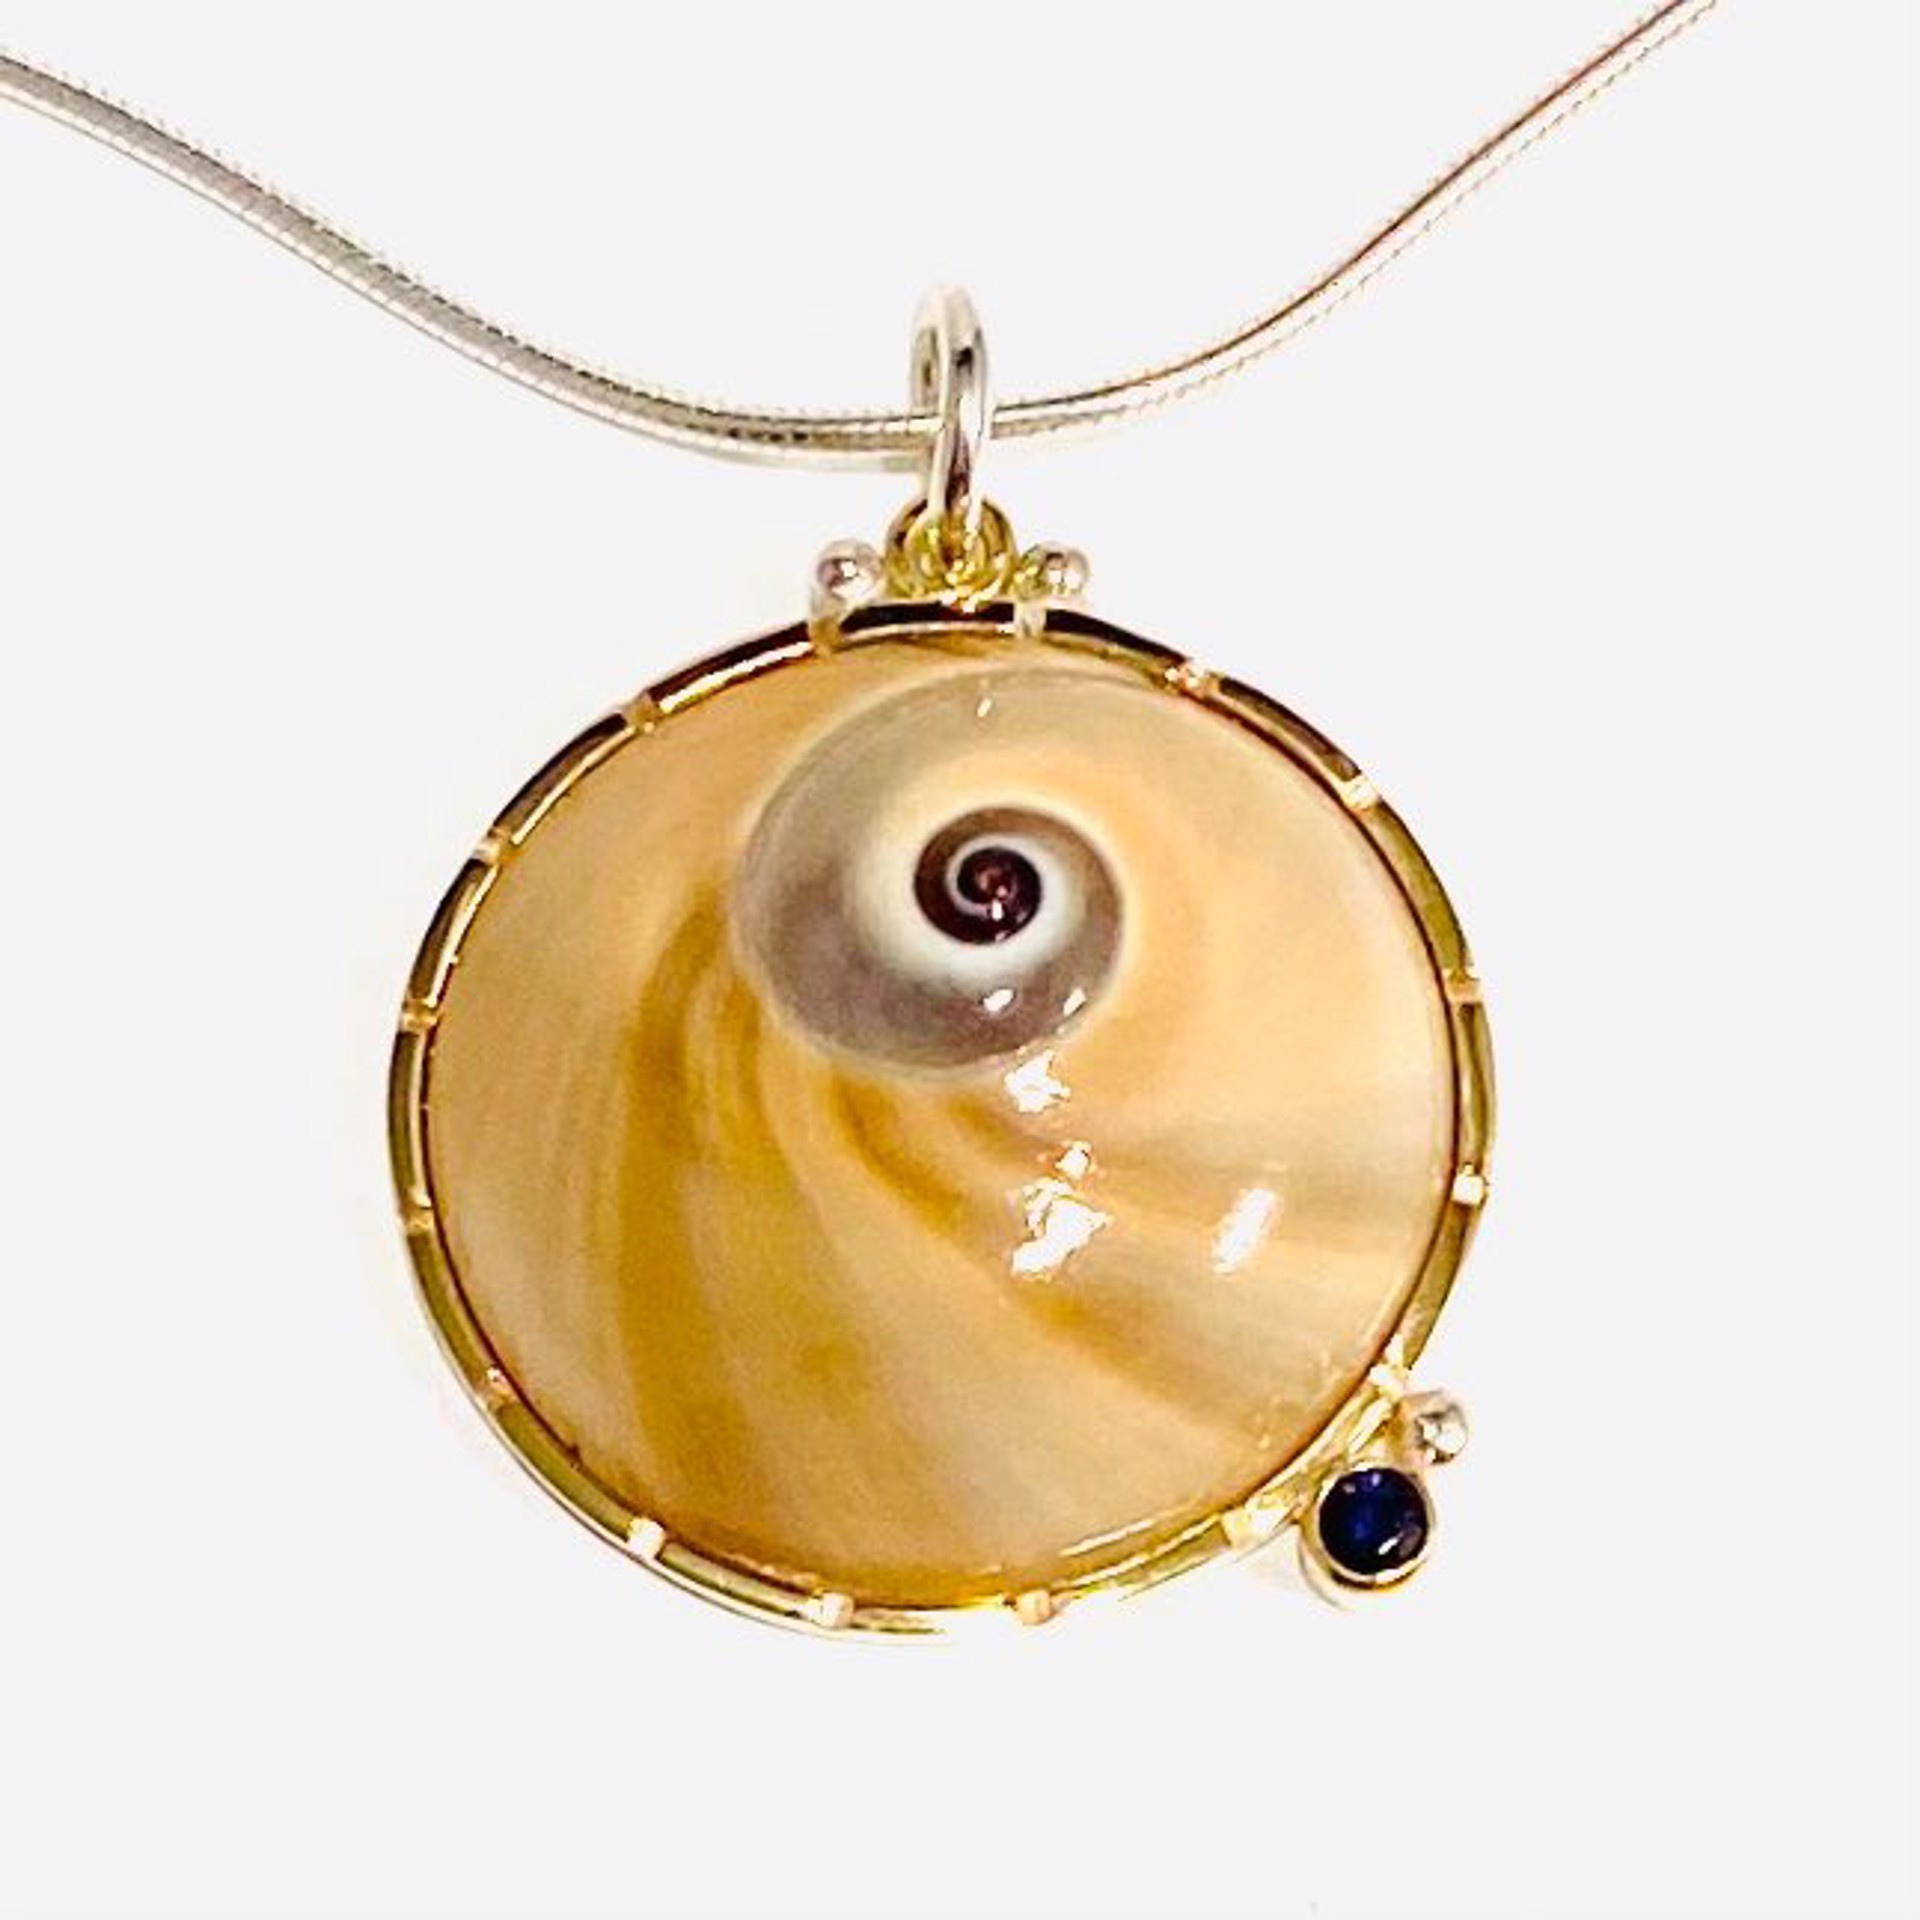 BU22-4 Moon Snail Shell Iolite Pendant on 18"Italian Silver Omaga Chain Necklace by Barbara Umbel